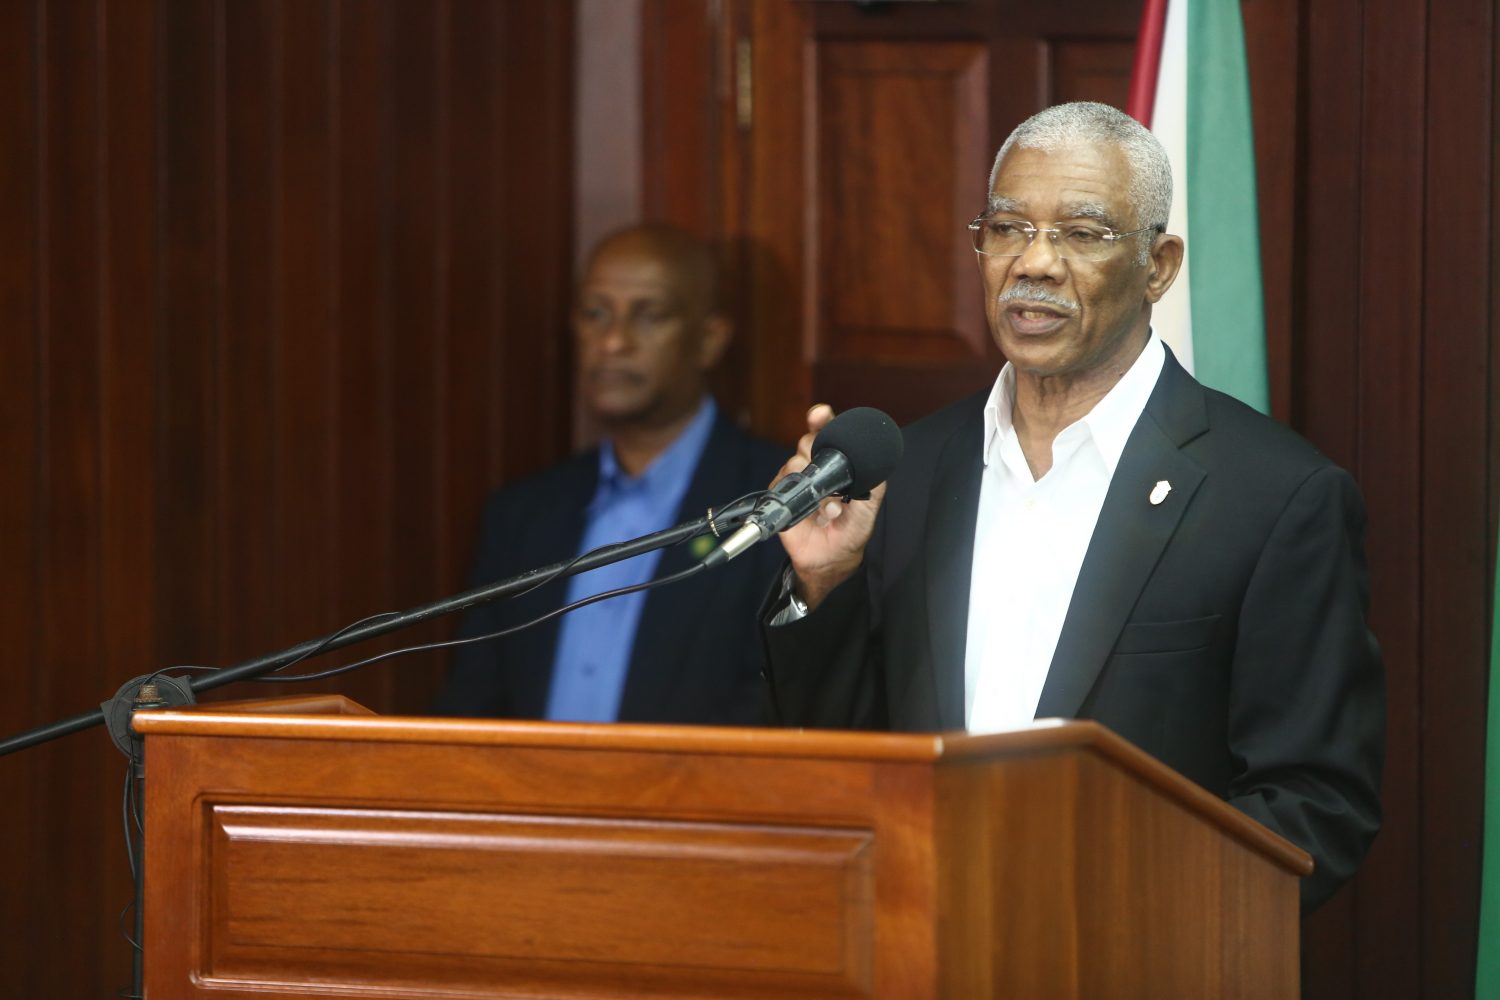 President David Granger speaking at the press conference today. (Keno George photo)